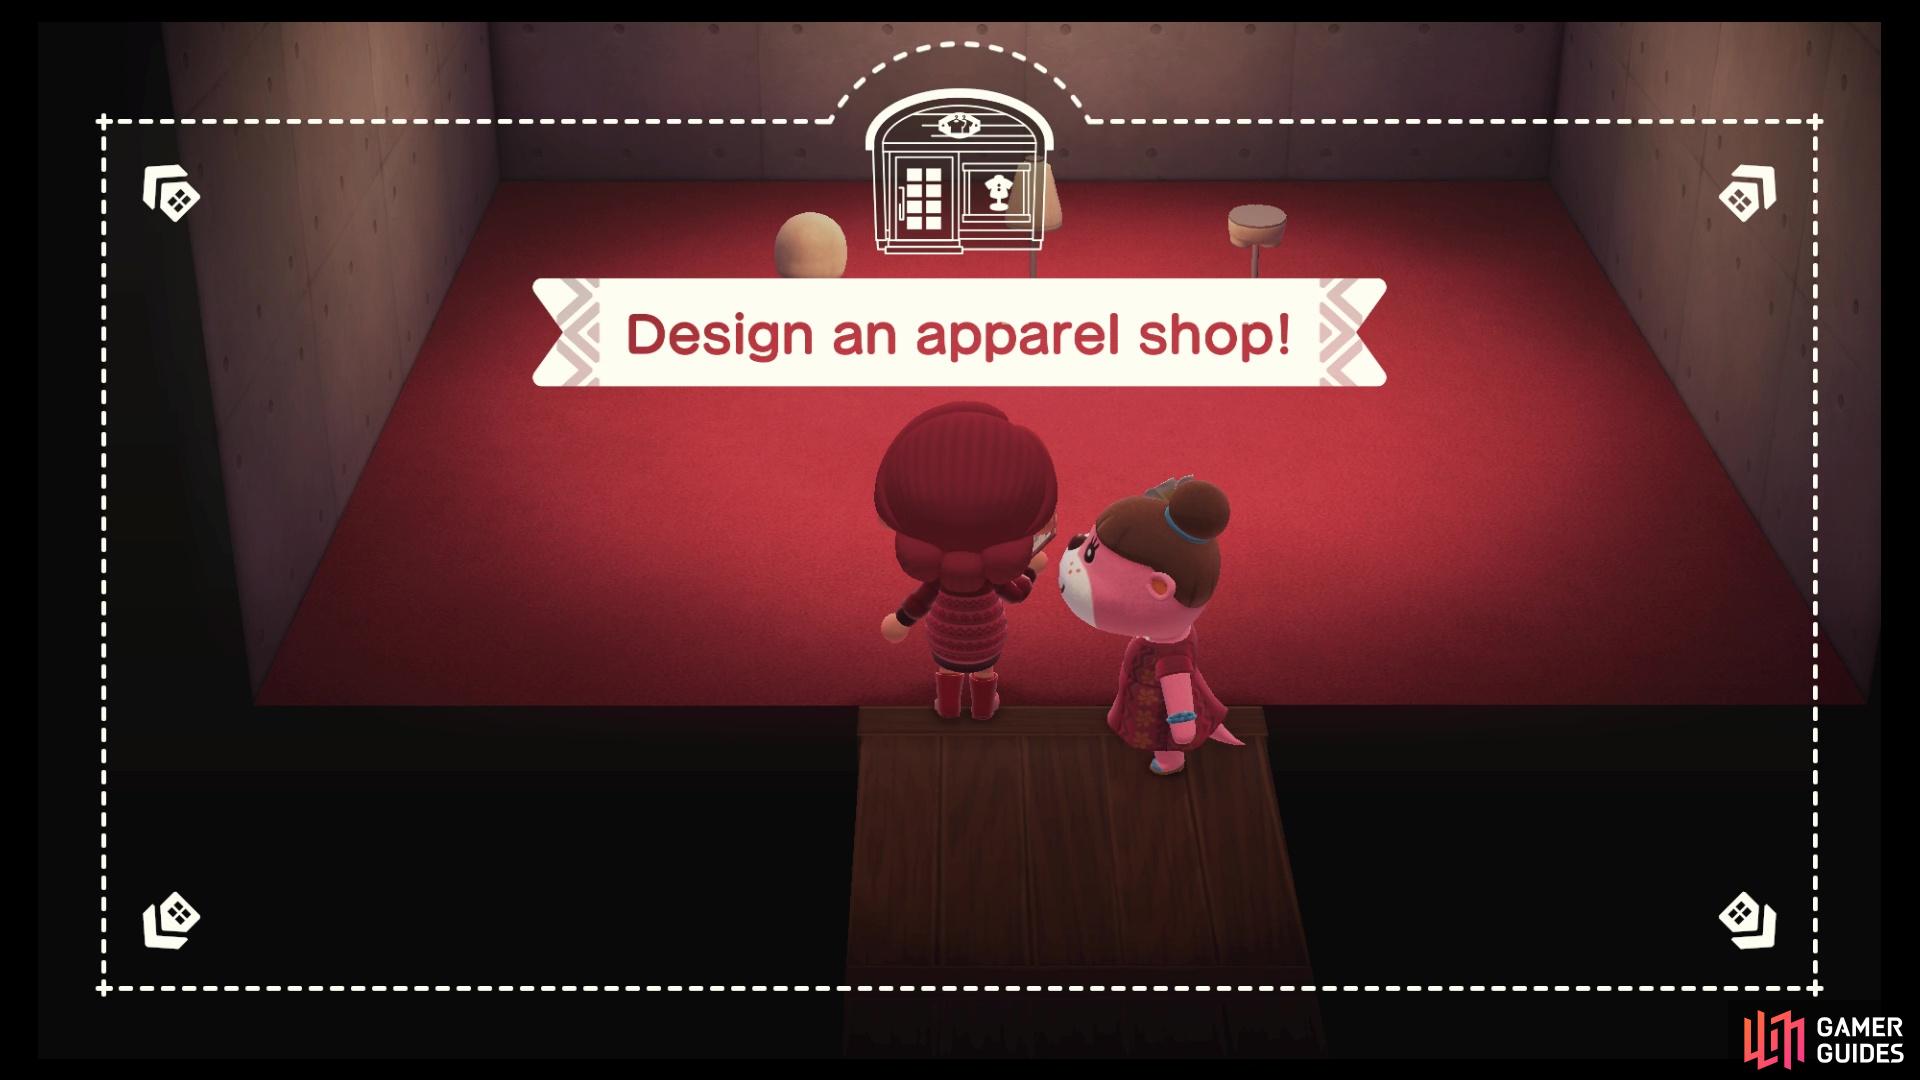 Time to remodel a clothing store!